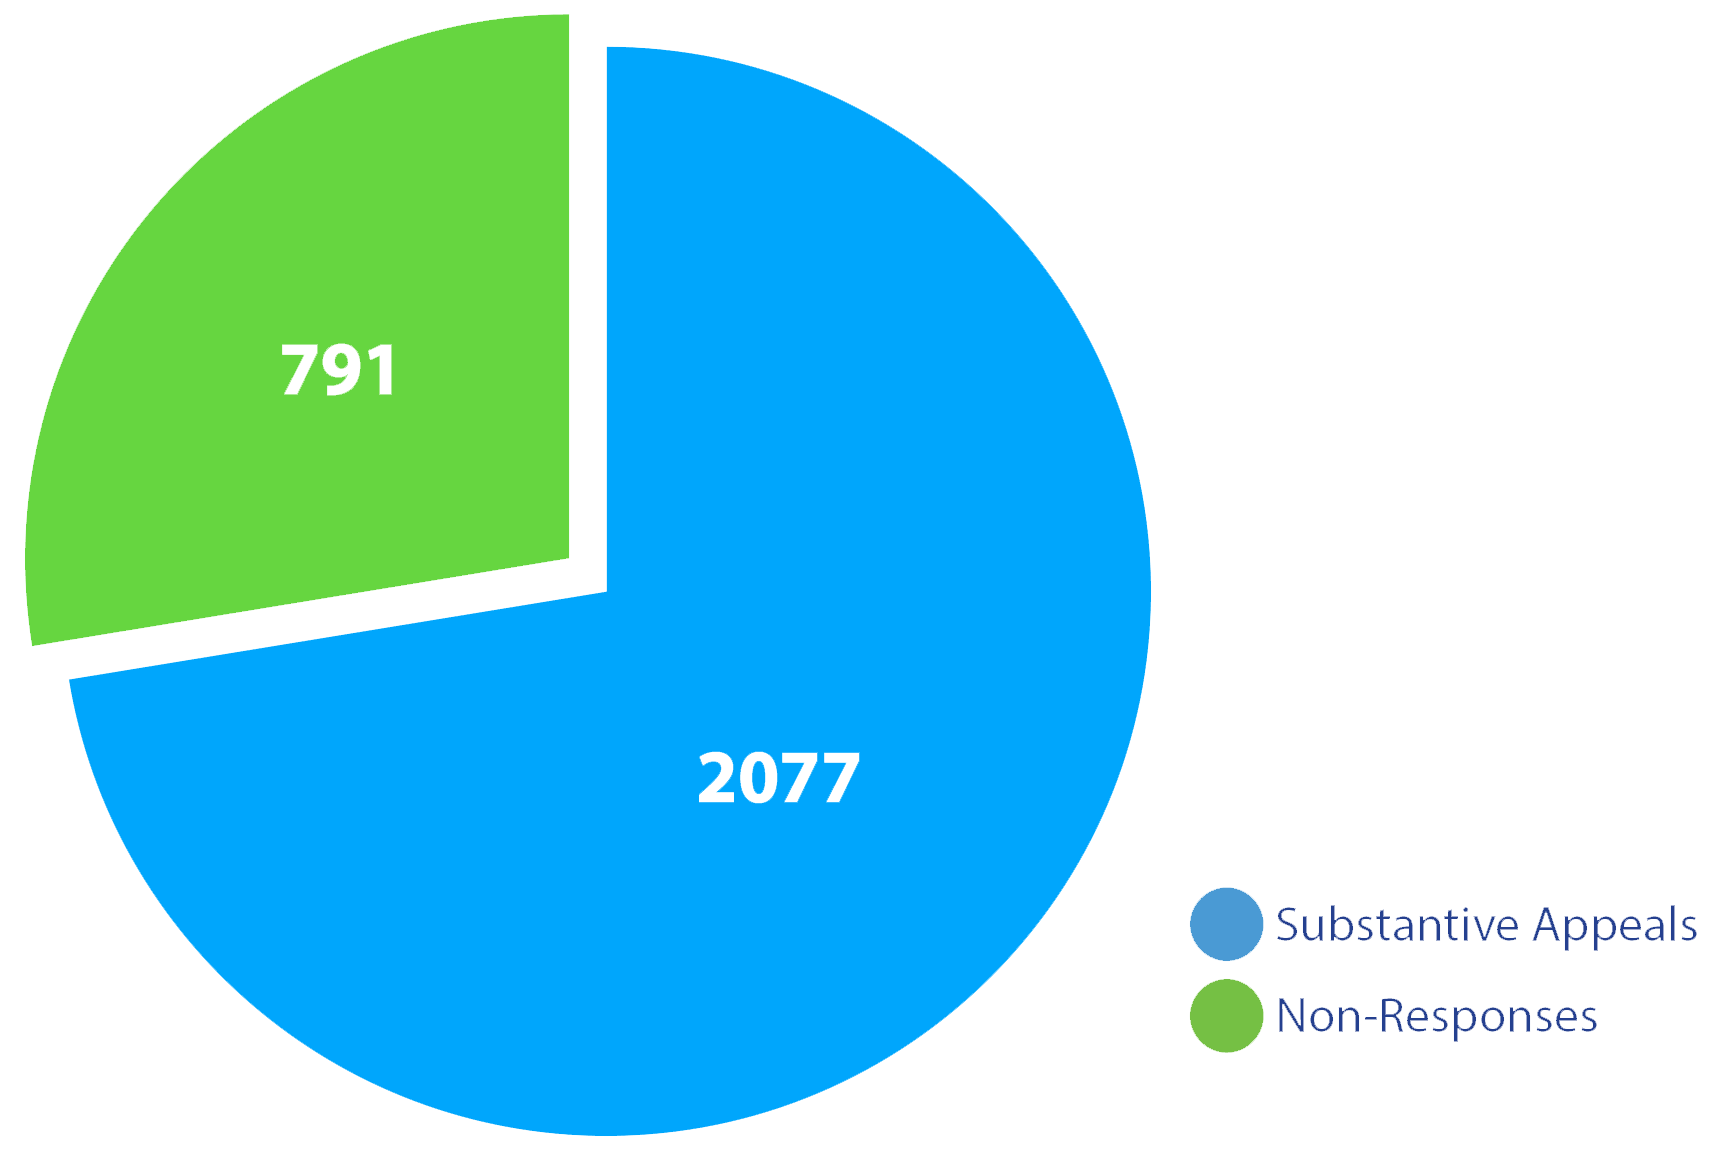 A pie chart that shows that. The Division received 2,077 substantive appeals and 791 non-responses.  